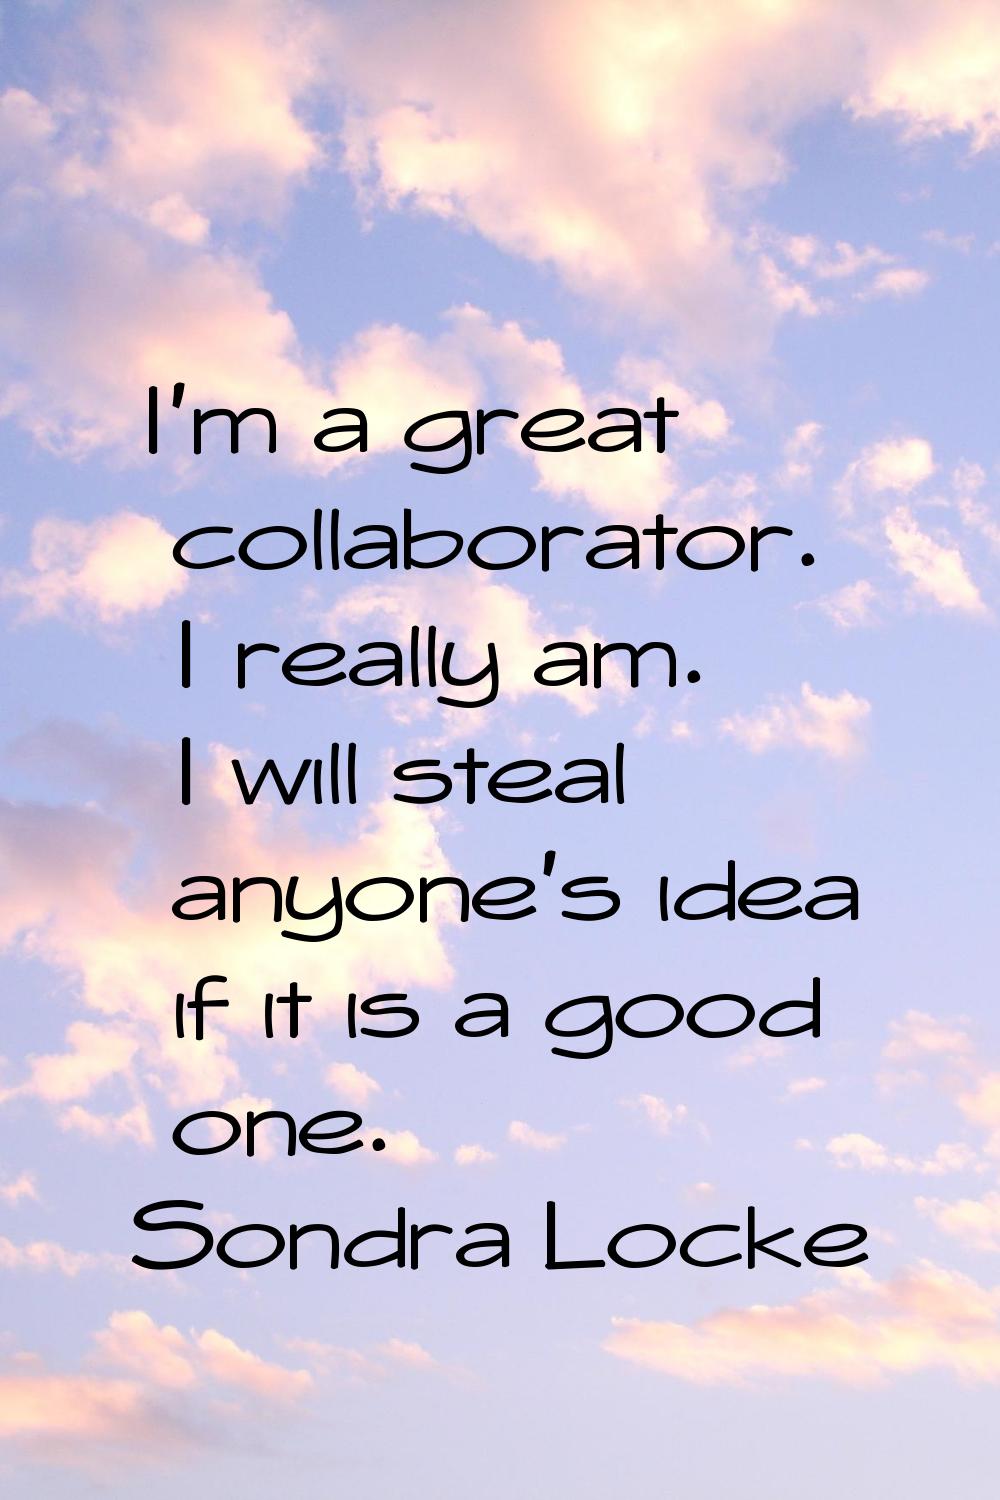 I'm a great collaborator. I really am. I will steal anyone's idea if it is a good one.